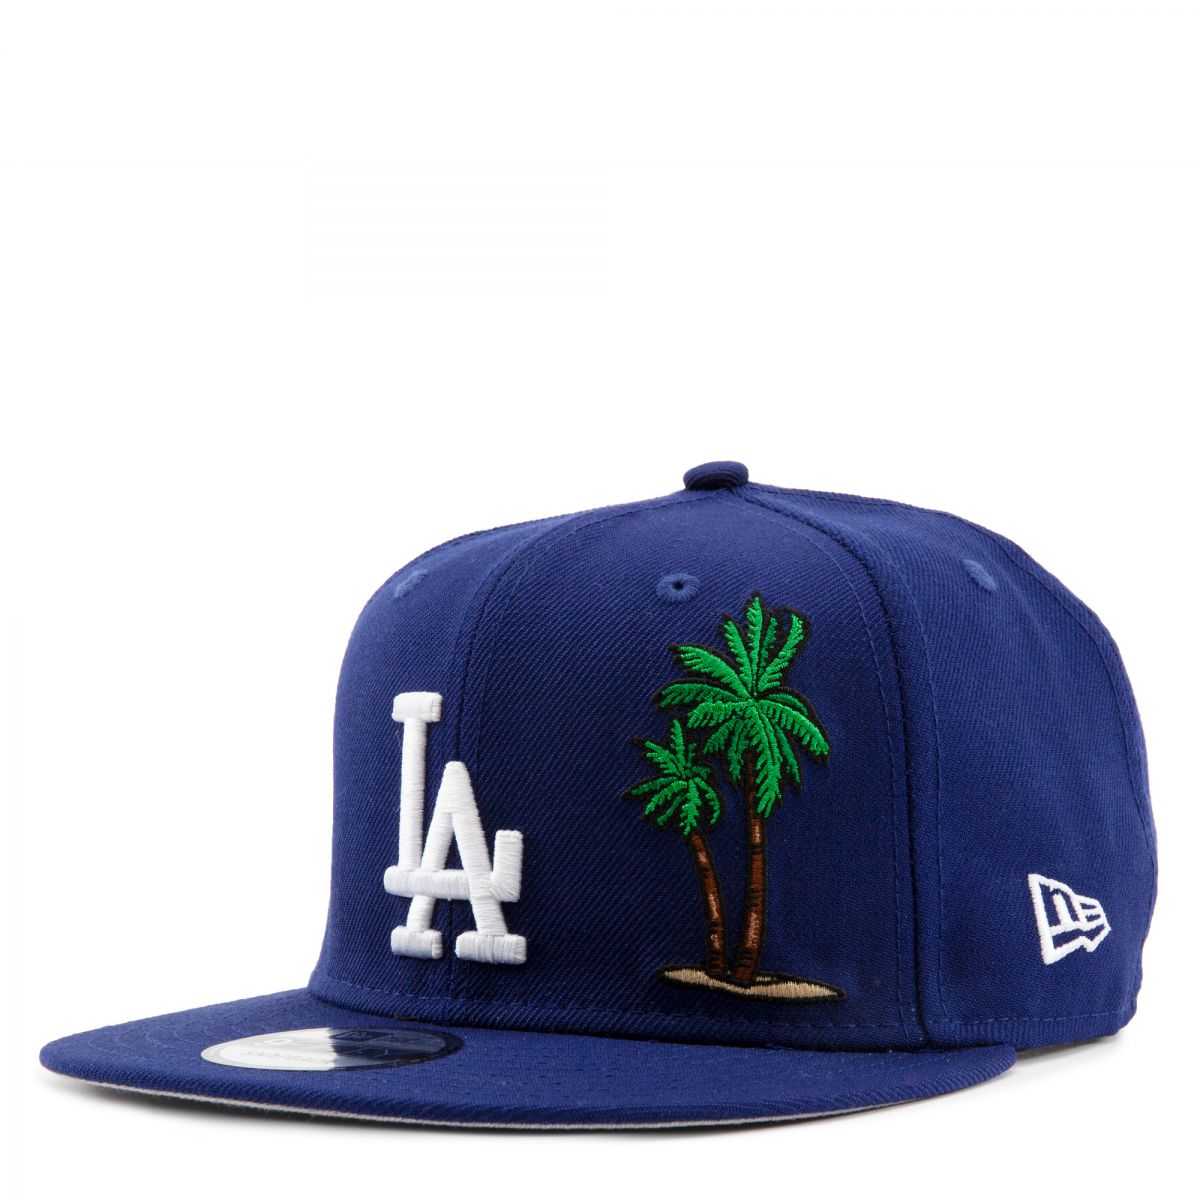 Just arrived!! New Dodgers Snapbacks just in time for Father's Day